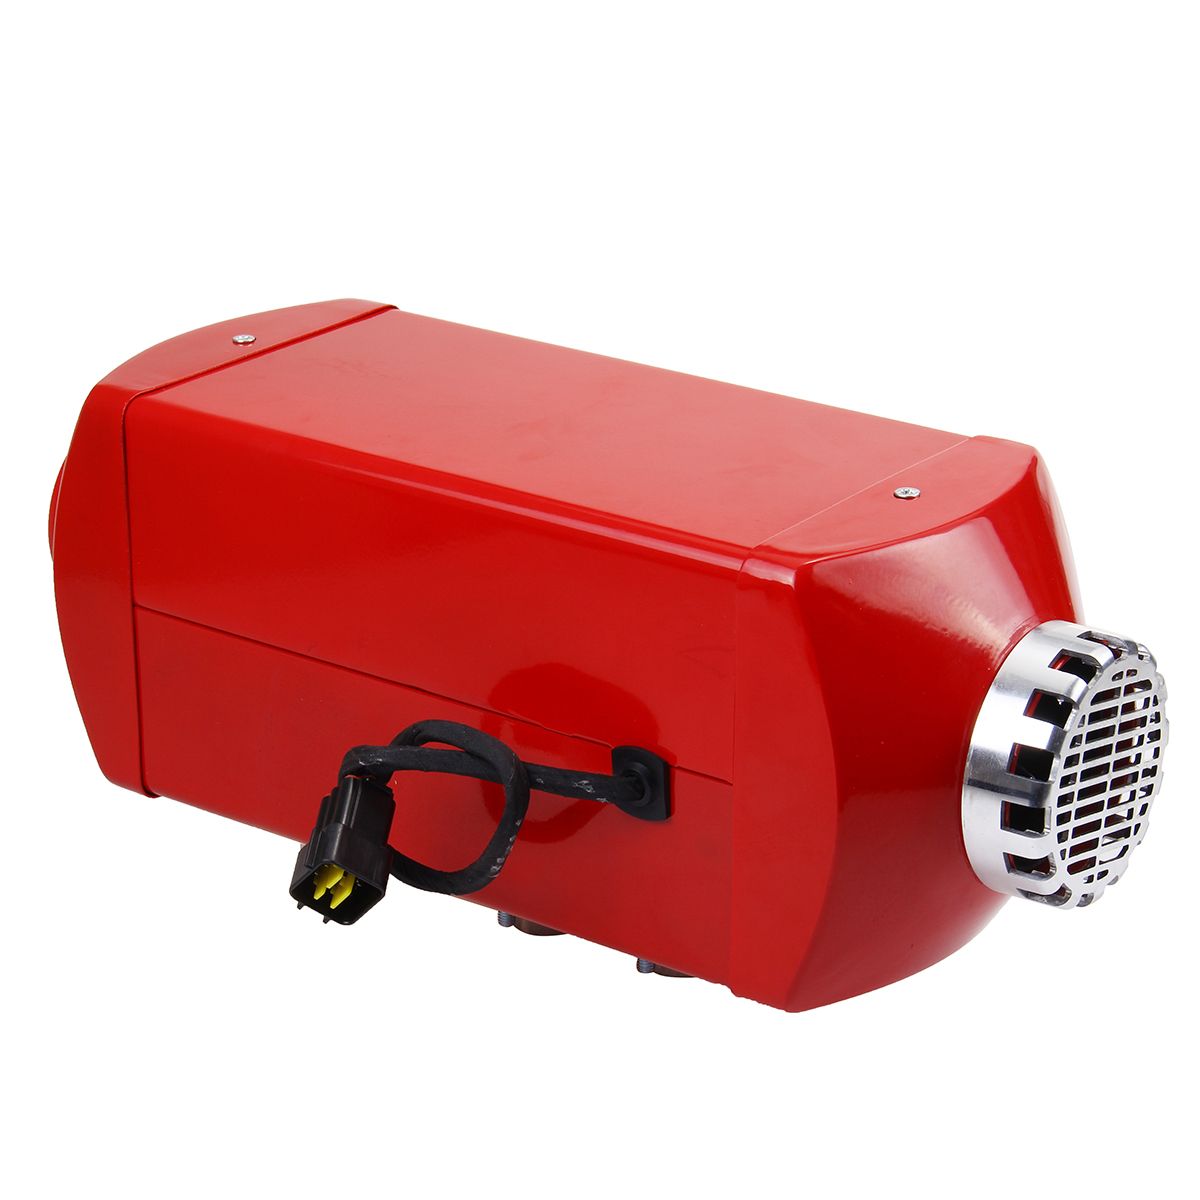 8000W-12V-Air-Diesel-Parking-Heater-Metal-Remote-Thermostat-For-Trucks-Boat-Car-Trailer-1597927